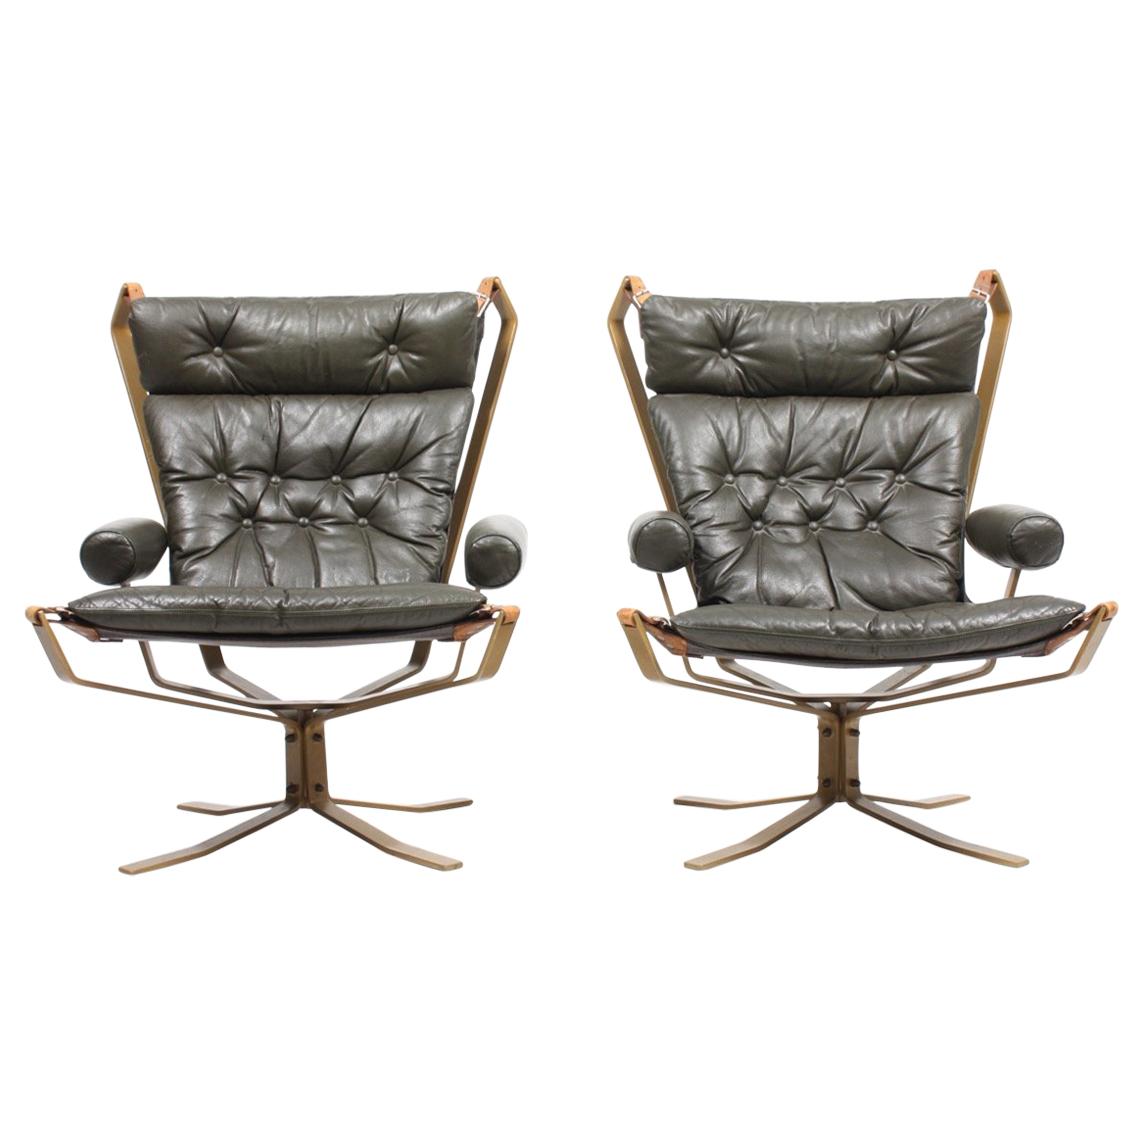 Pair of Lounge Chairs in Leather